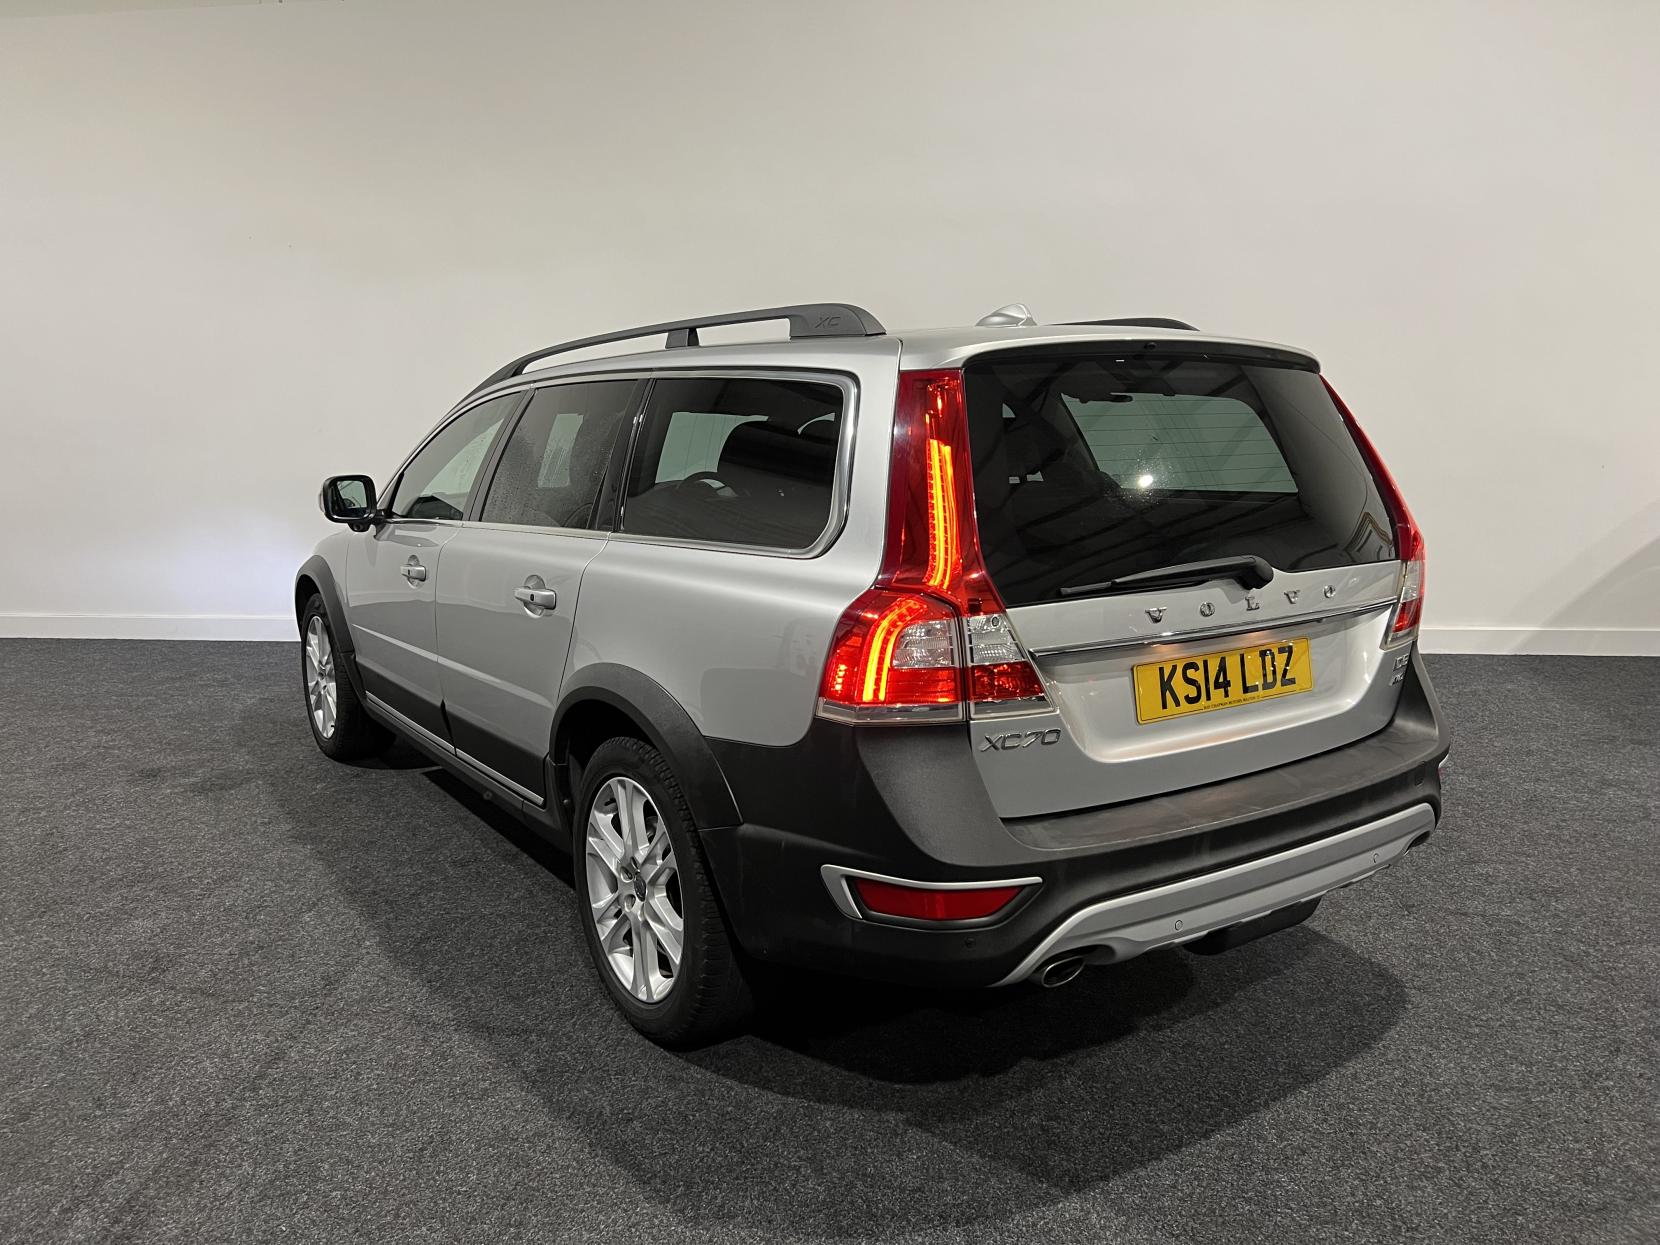 Volvo XC70 2.4 D5 SE Lux Estate 5dr Diesel Geartronic AWD Euro 5 (215 ps)